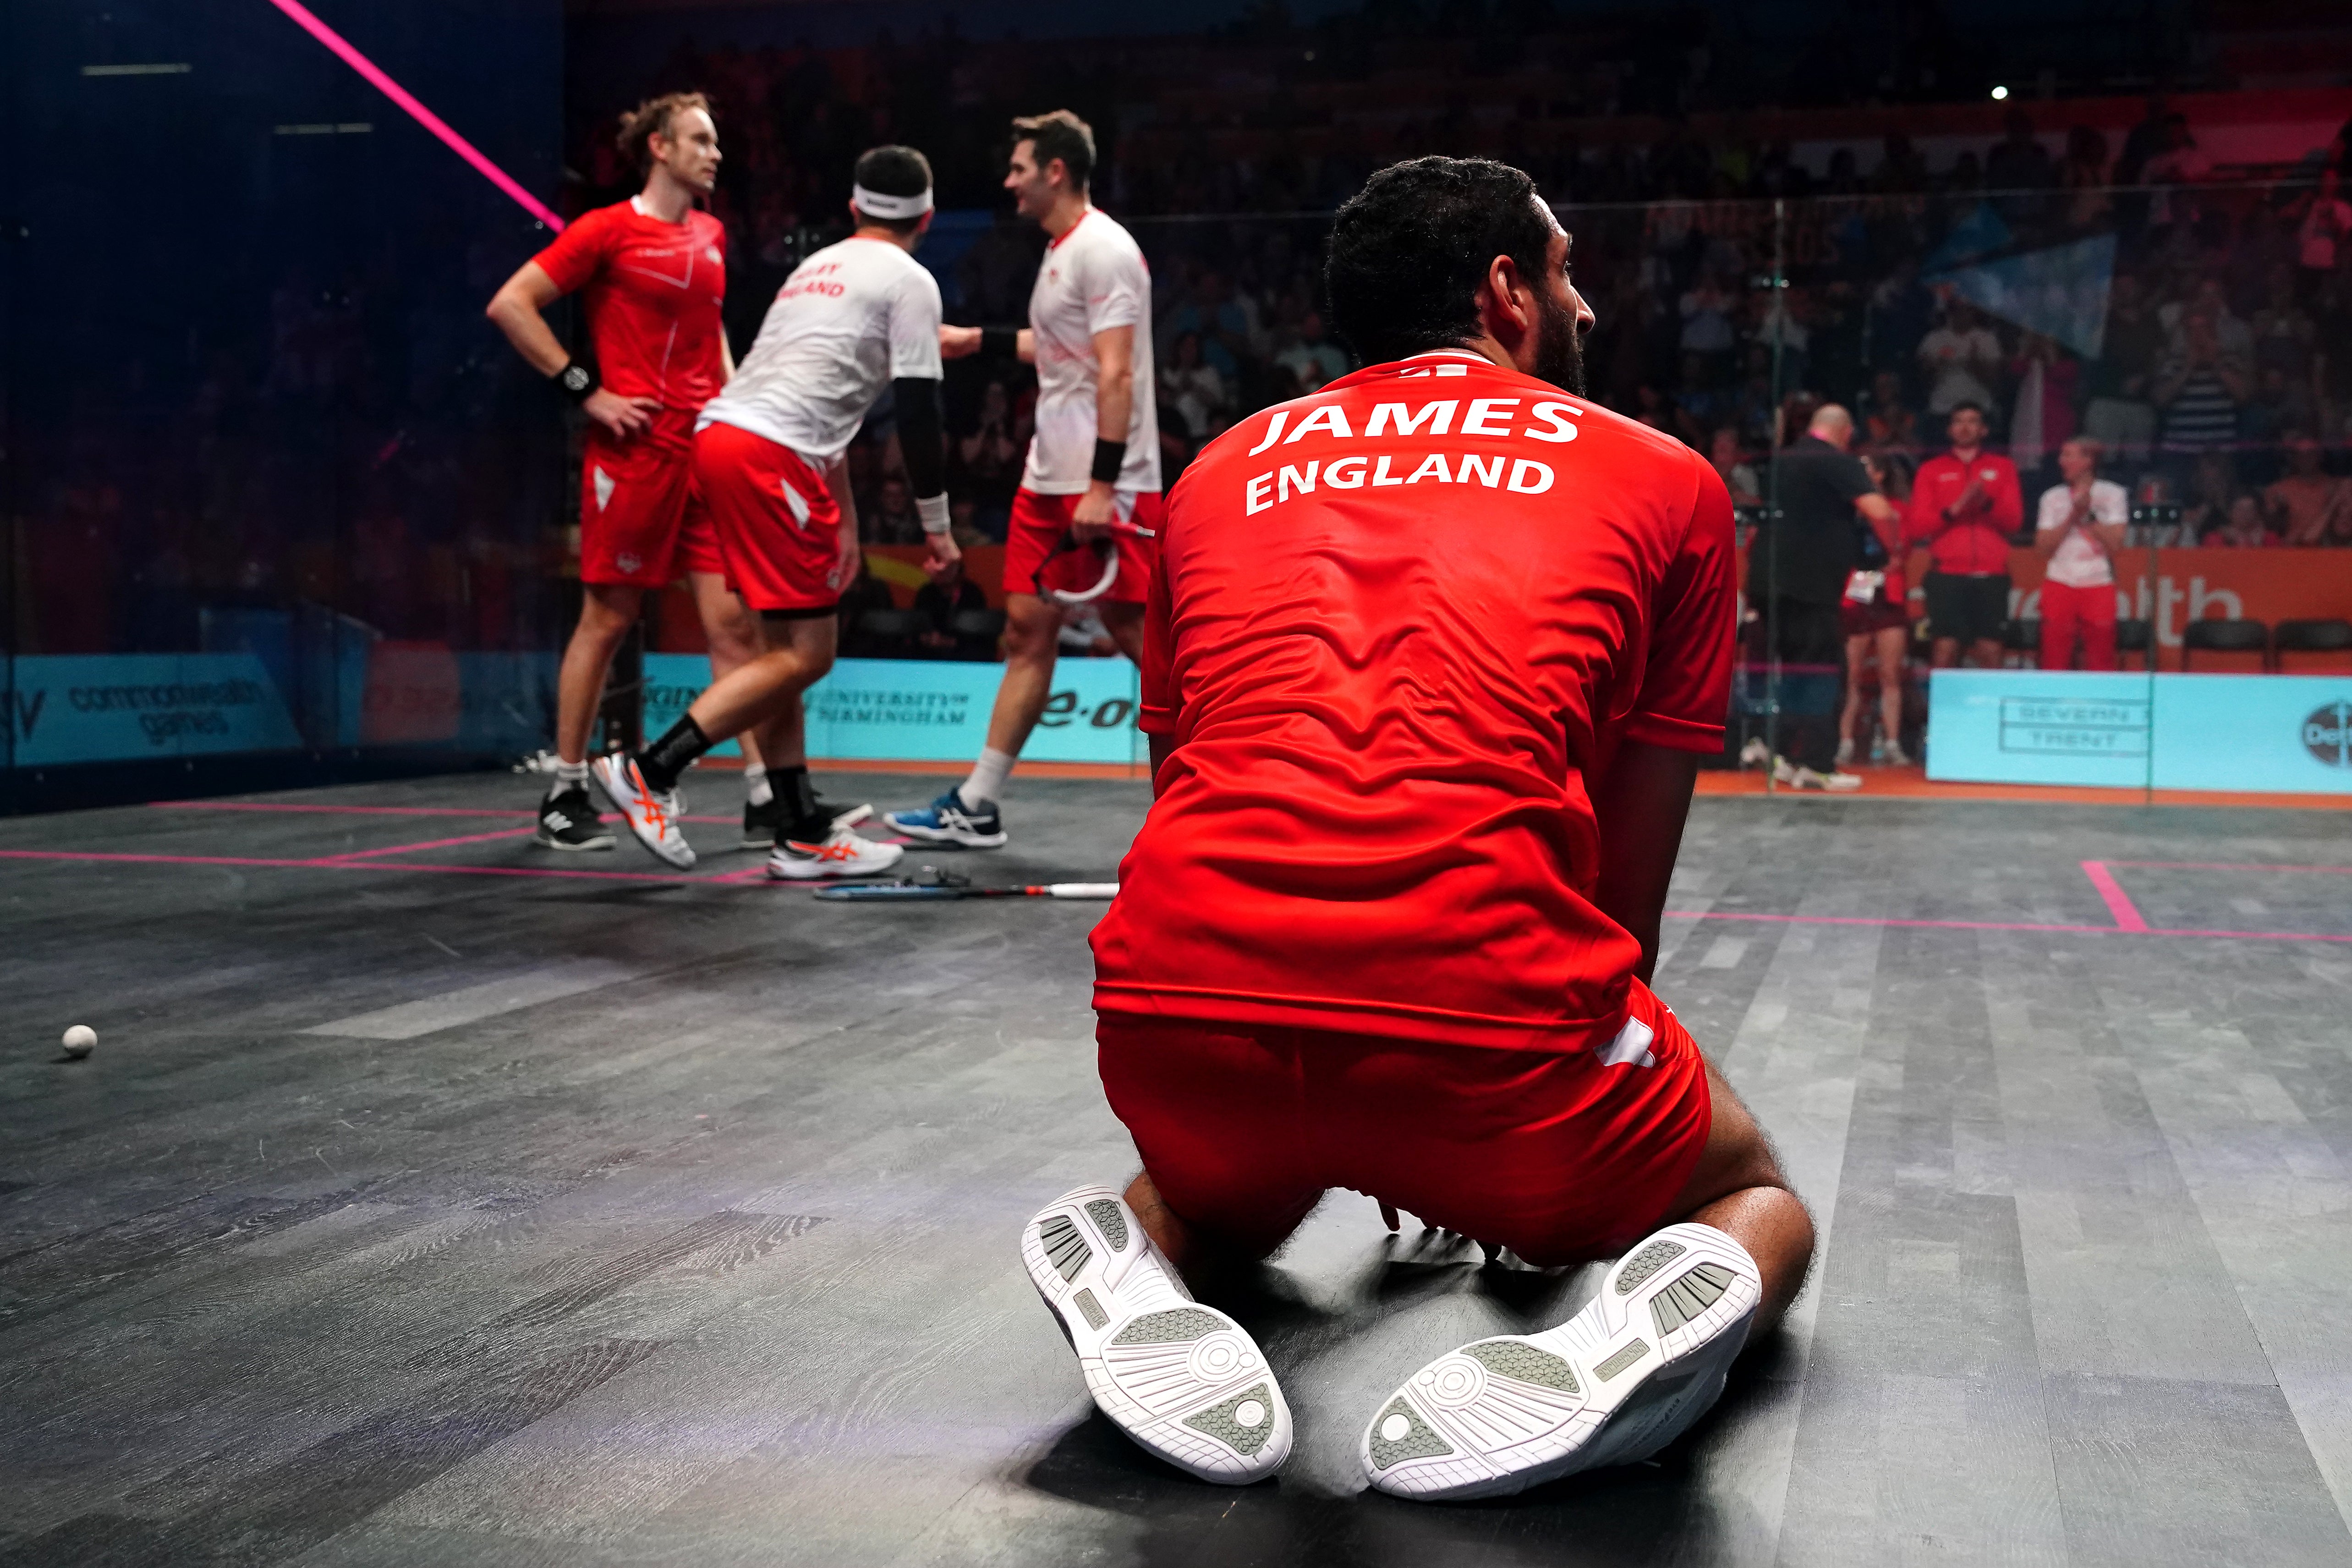 England’s Declan James celebrated victory in the men’s squash doubles gold medal match with team-mate James Willstrop against England’s Adrian Waller and Daryl Selby (Mike Egerton/PA)